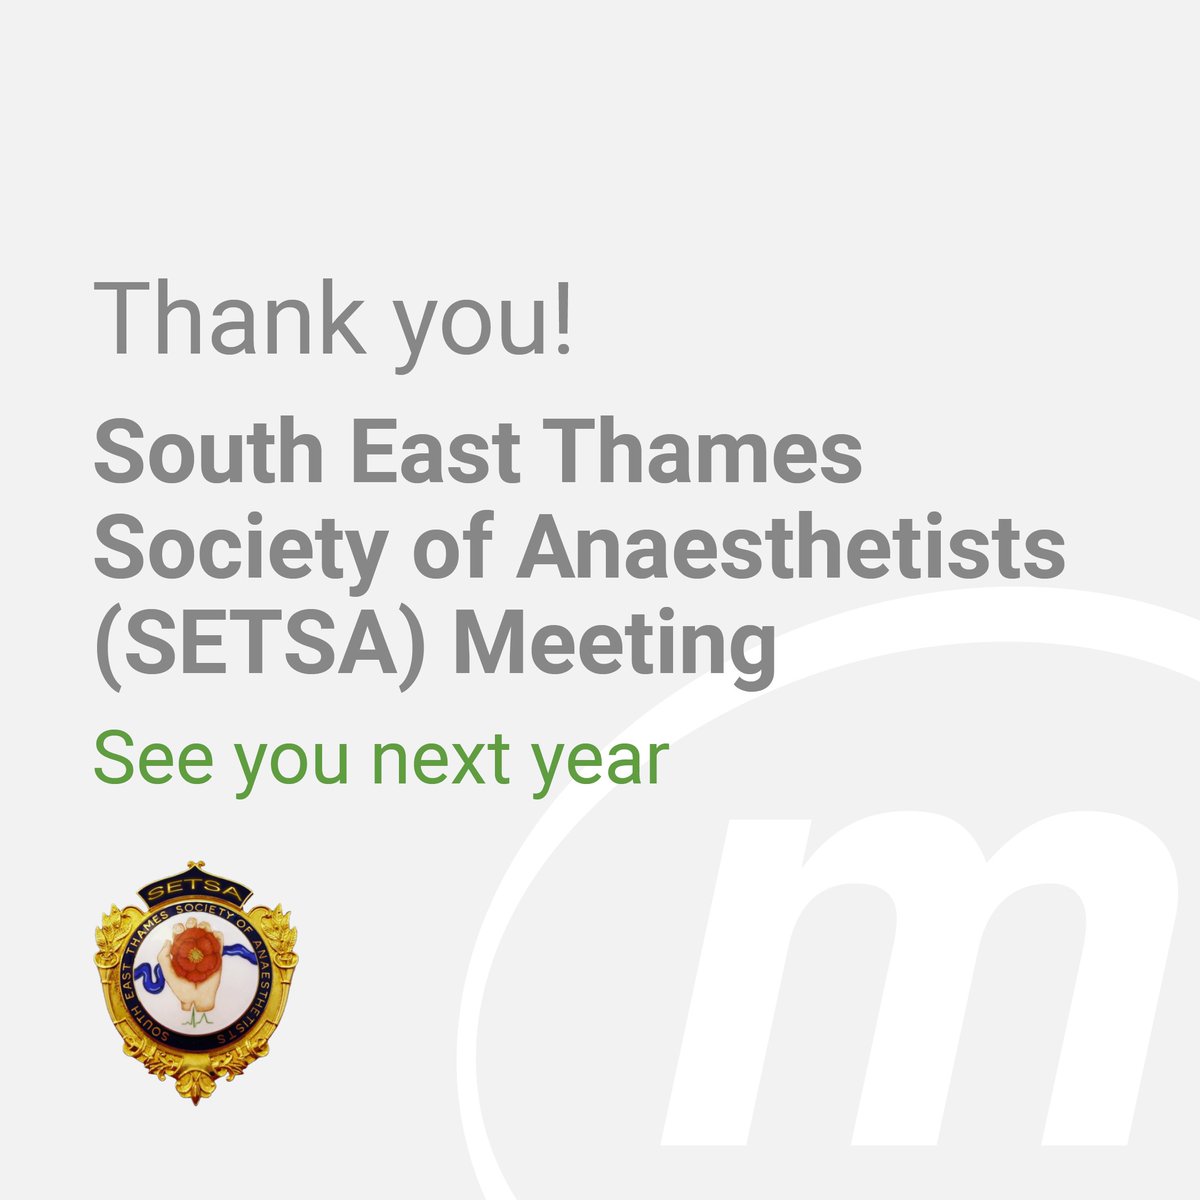 Thank you, South East Thames Society of Anaesthetists (SETSA) Meeting!

See you next year